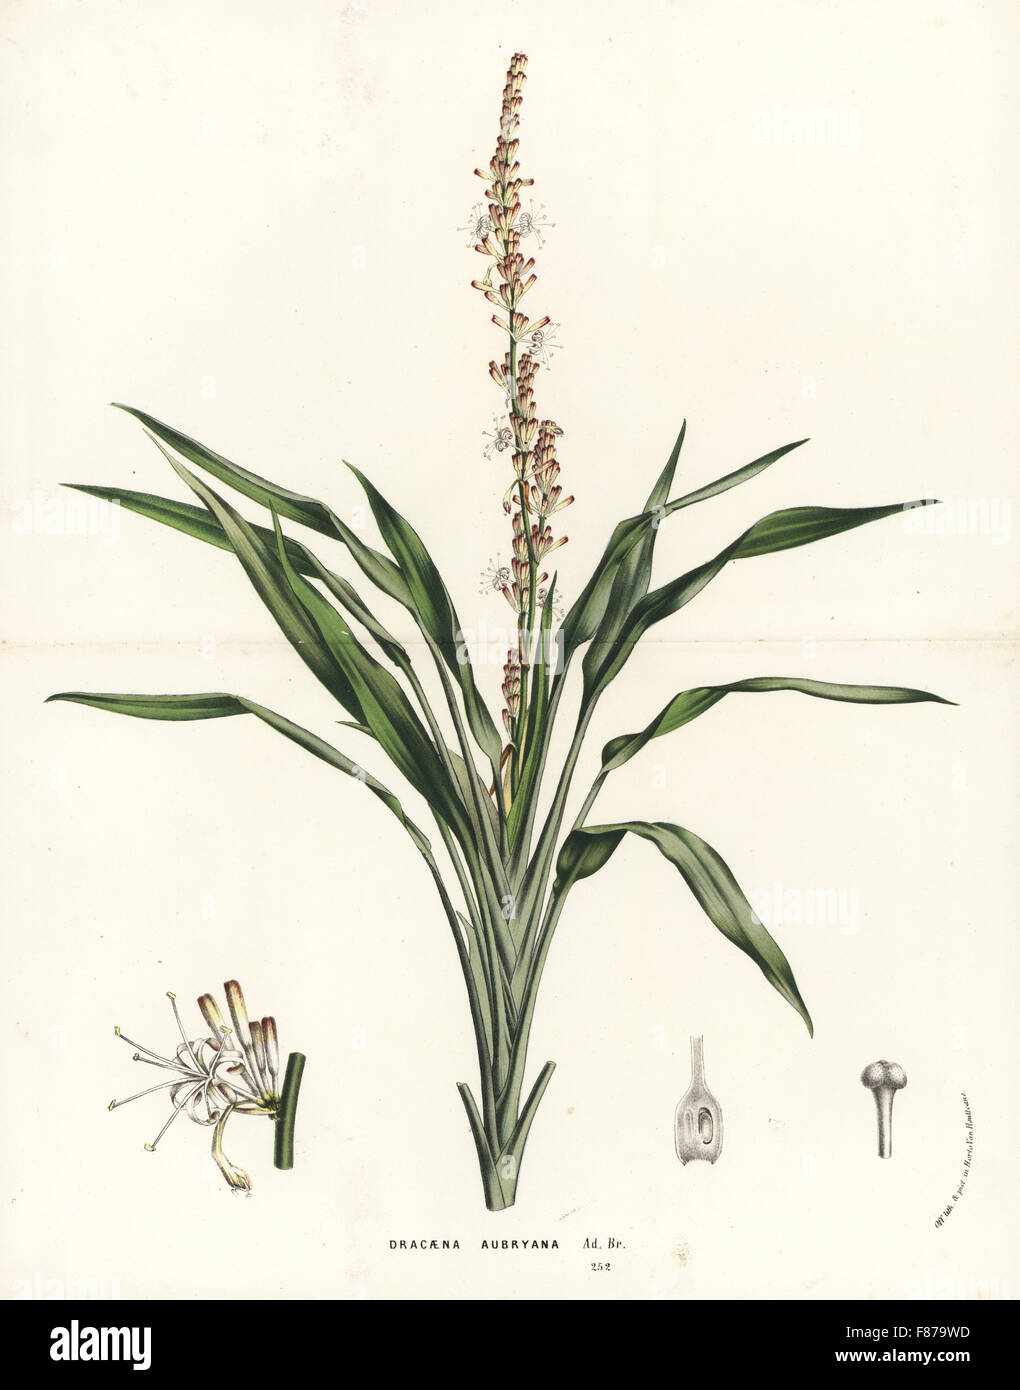 Lance dracaena orchid, Dracaena aubryana. Handcoloured lithograph from Louis van Houtte and Charles Lemaire's Flowers of the Gardens and Hothouses of Europe, Flore des Serres et des Jardins de l'Europe, Ghent, Belgium, 1862-65. Stock Photo